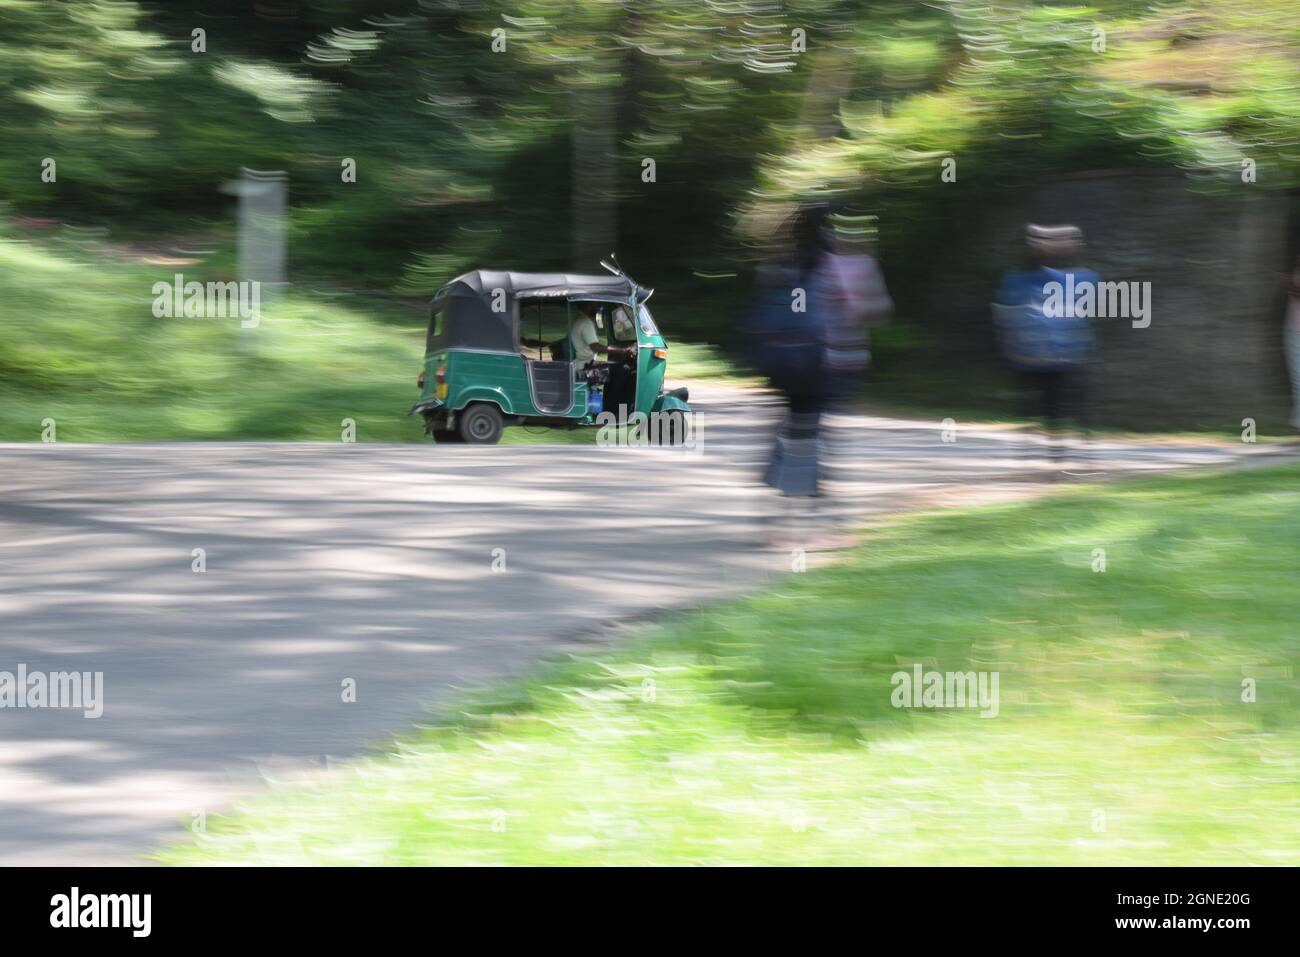 Don't Forget to ride a tuk tuk while you are on vacation in Sri Lanka. Stock Photo